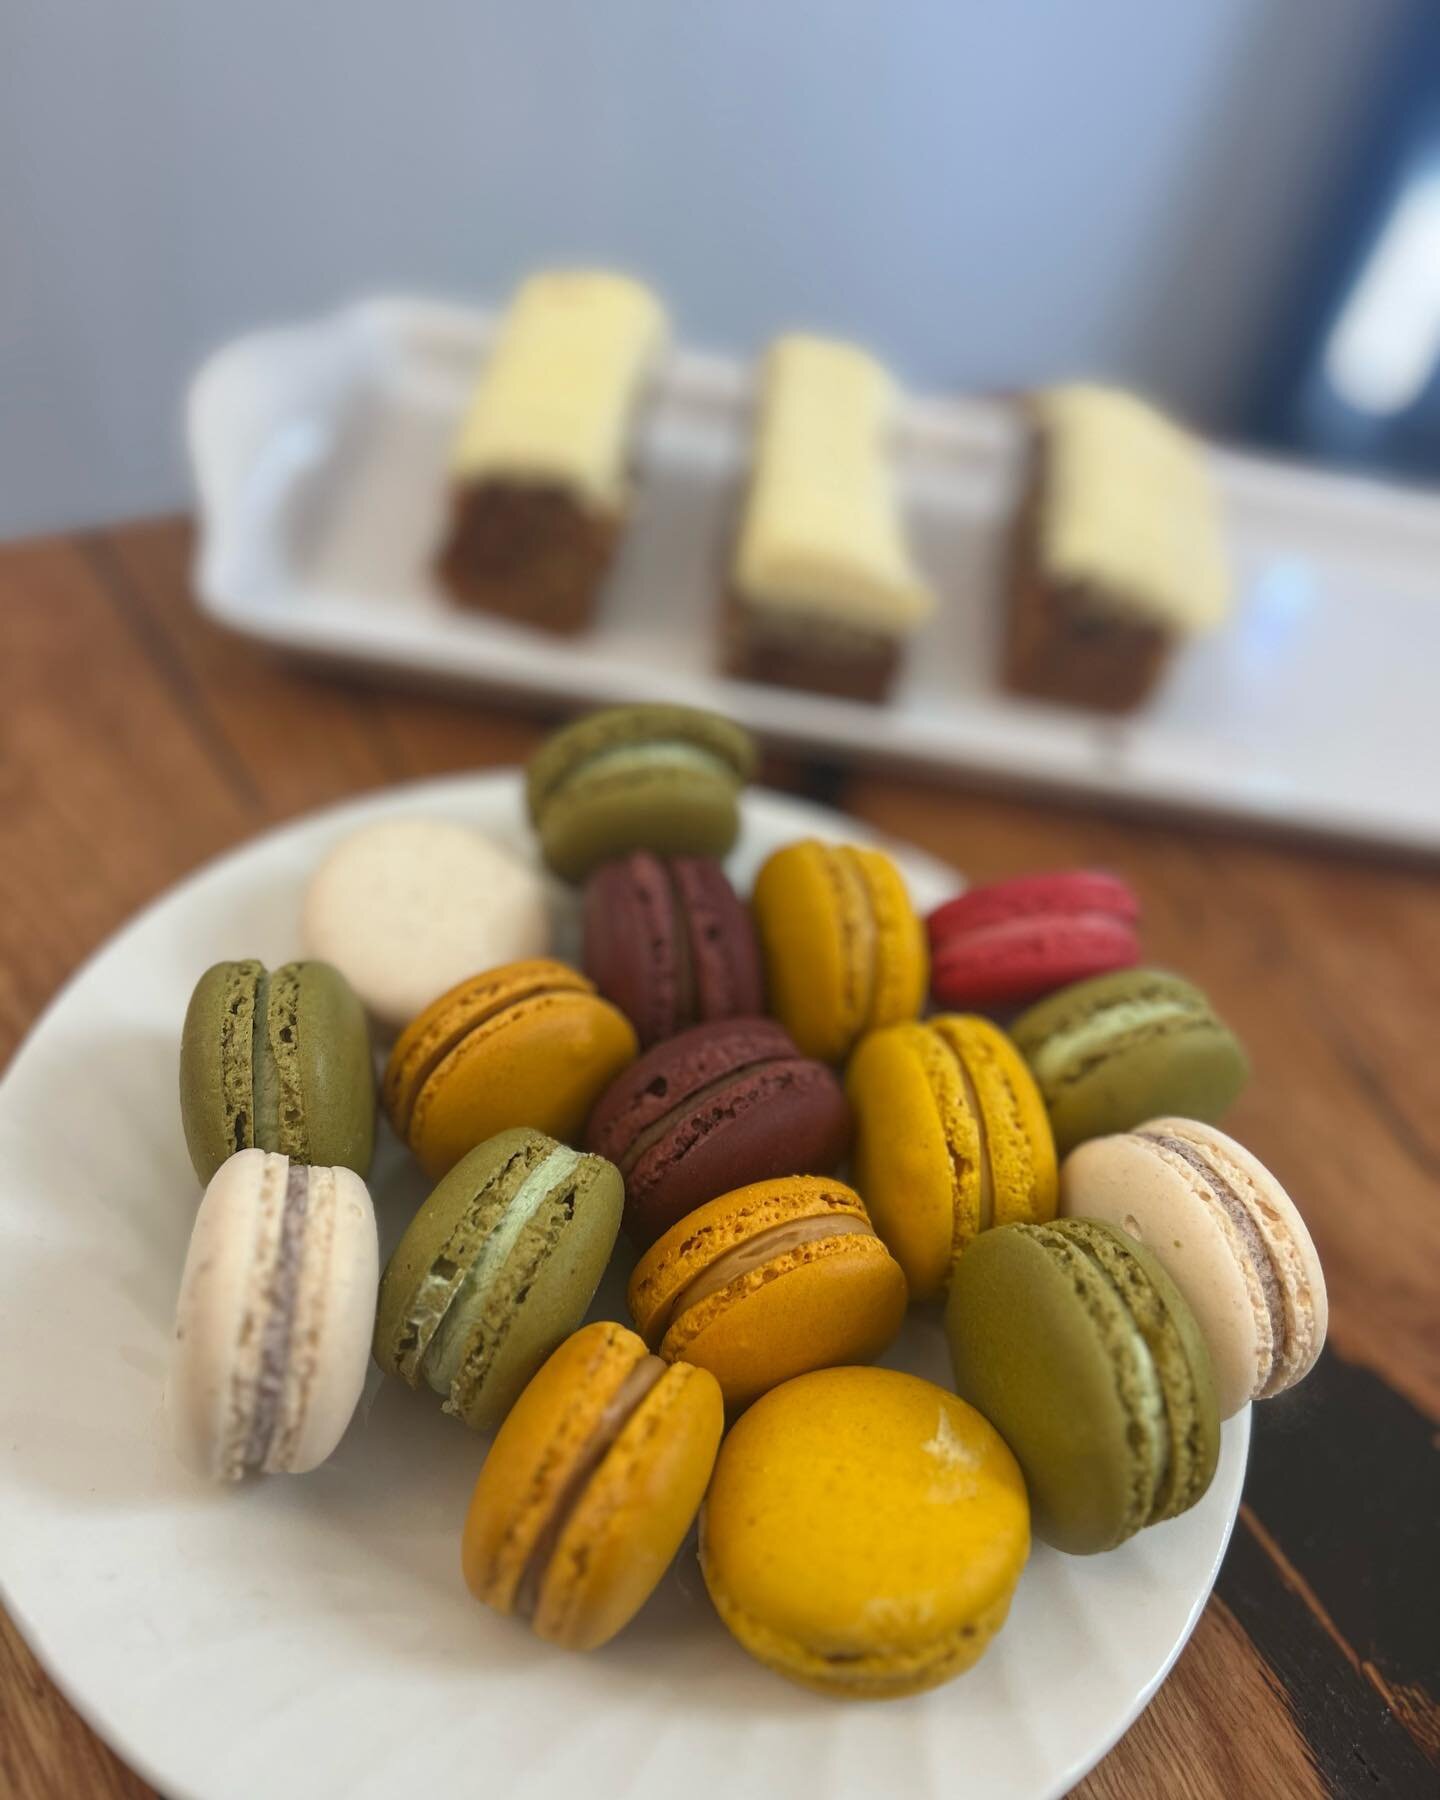 delicious desserts being served this weekend 🤩

Reminder we are FULLY booked today for lunch and won&rsquo;t be taking walk ins. 

Hope to see you over the rest of the weekend 🍕
#olddalystonchurch #restaurant #visitgippsland #dalyston #basscoast